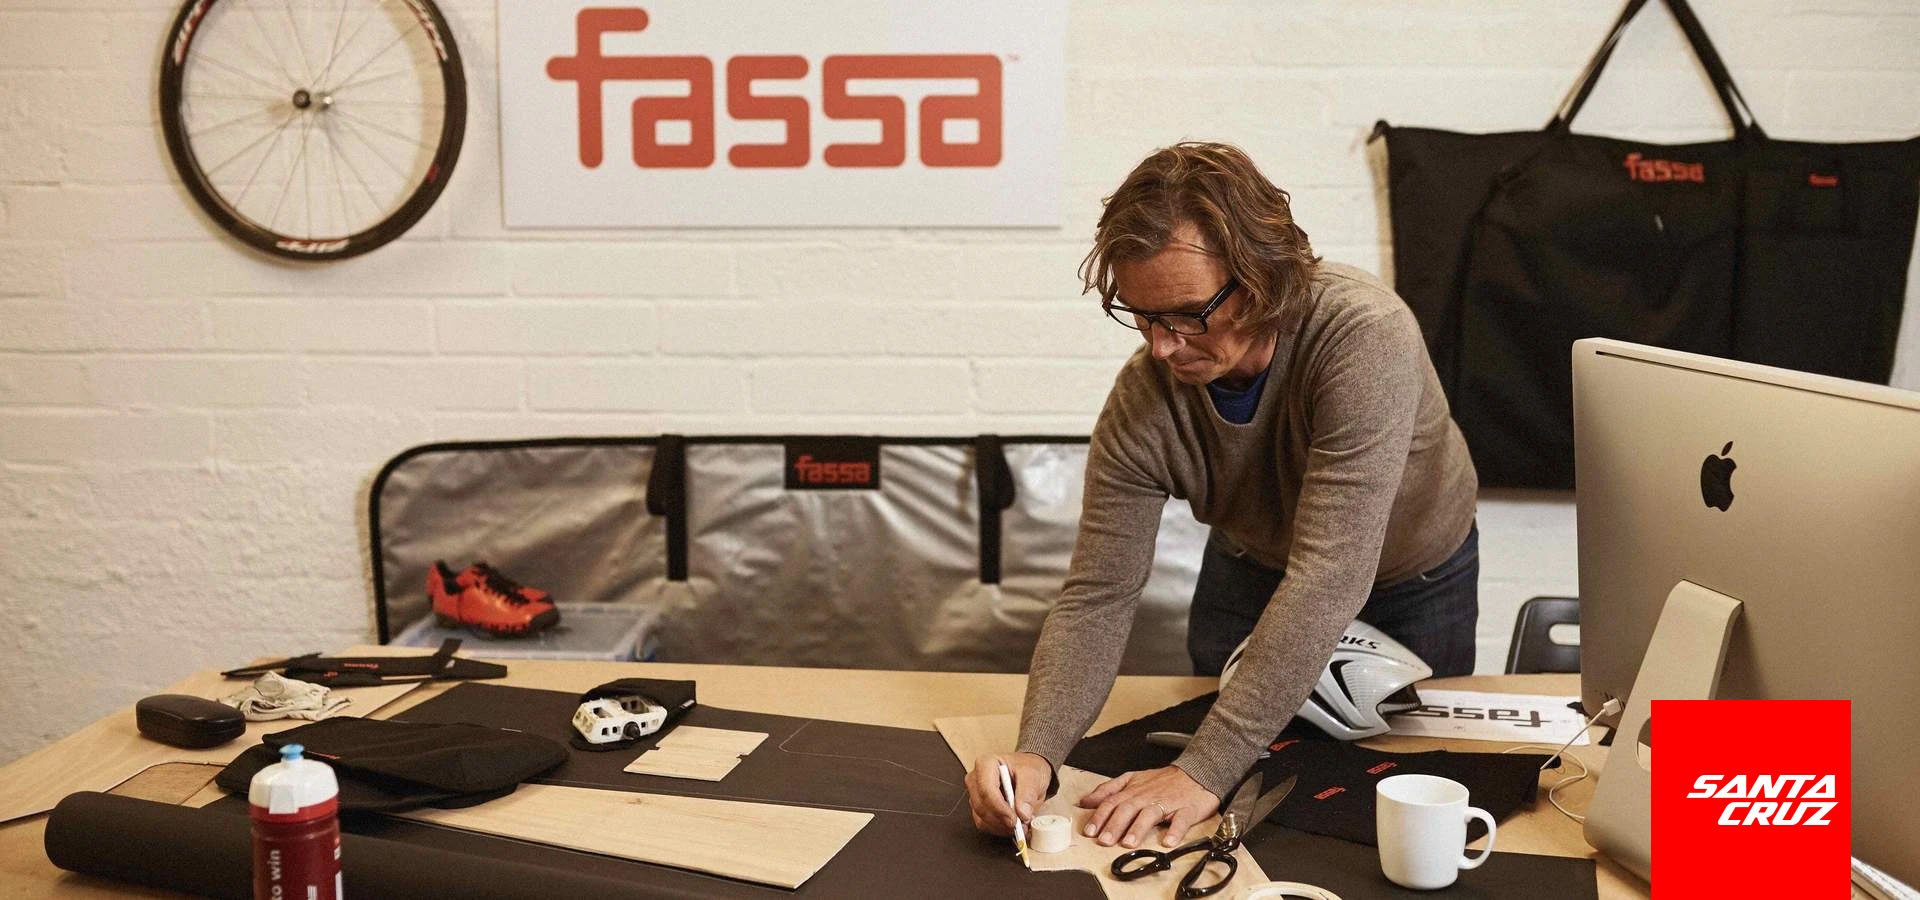 Fassa Cycling Products. Fassa Bicycle Protection - Free UK delivery